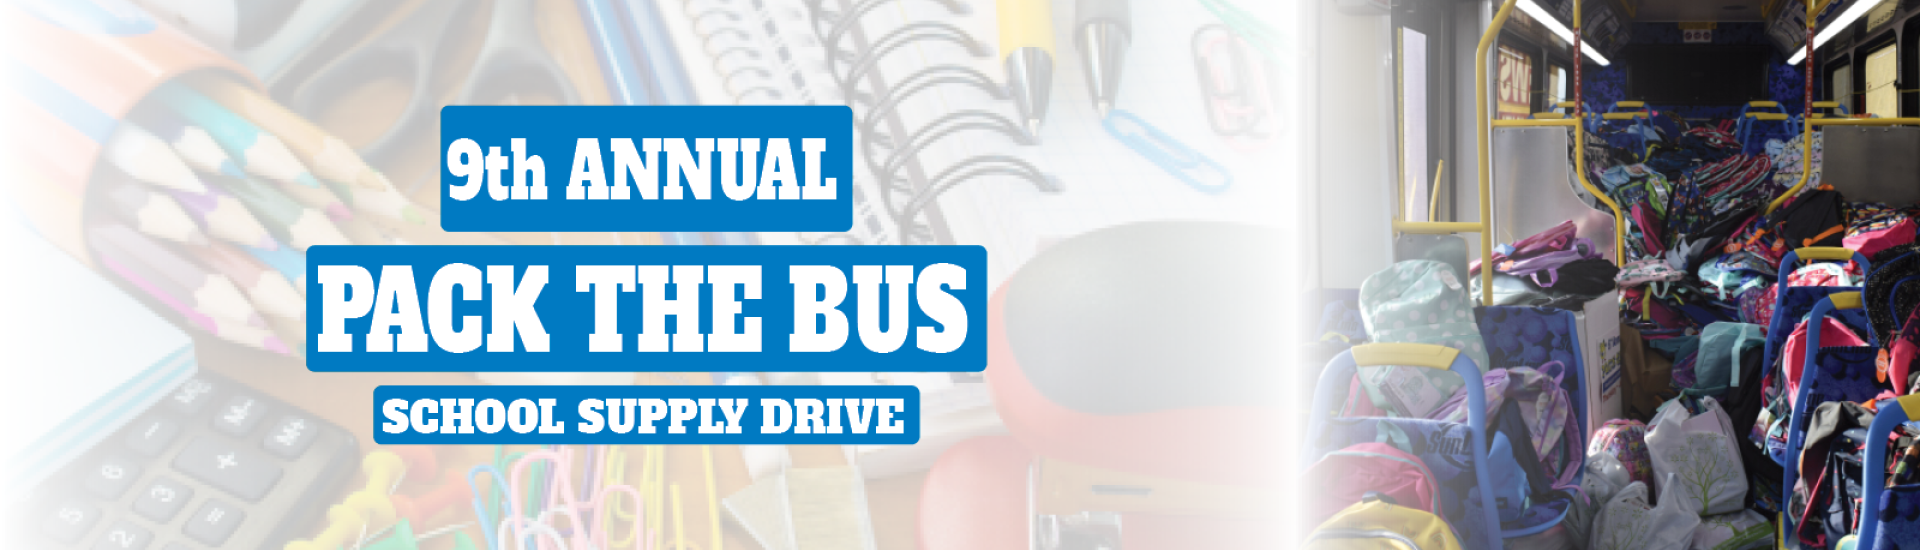 9th Annual Pack the Bus image banner